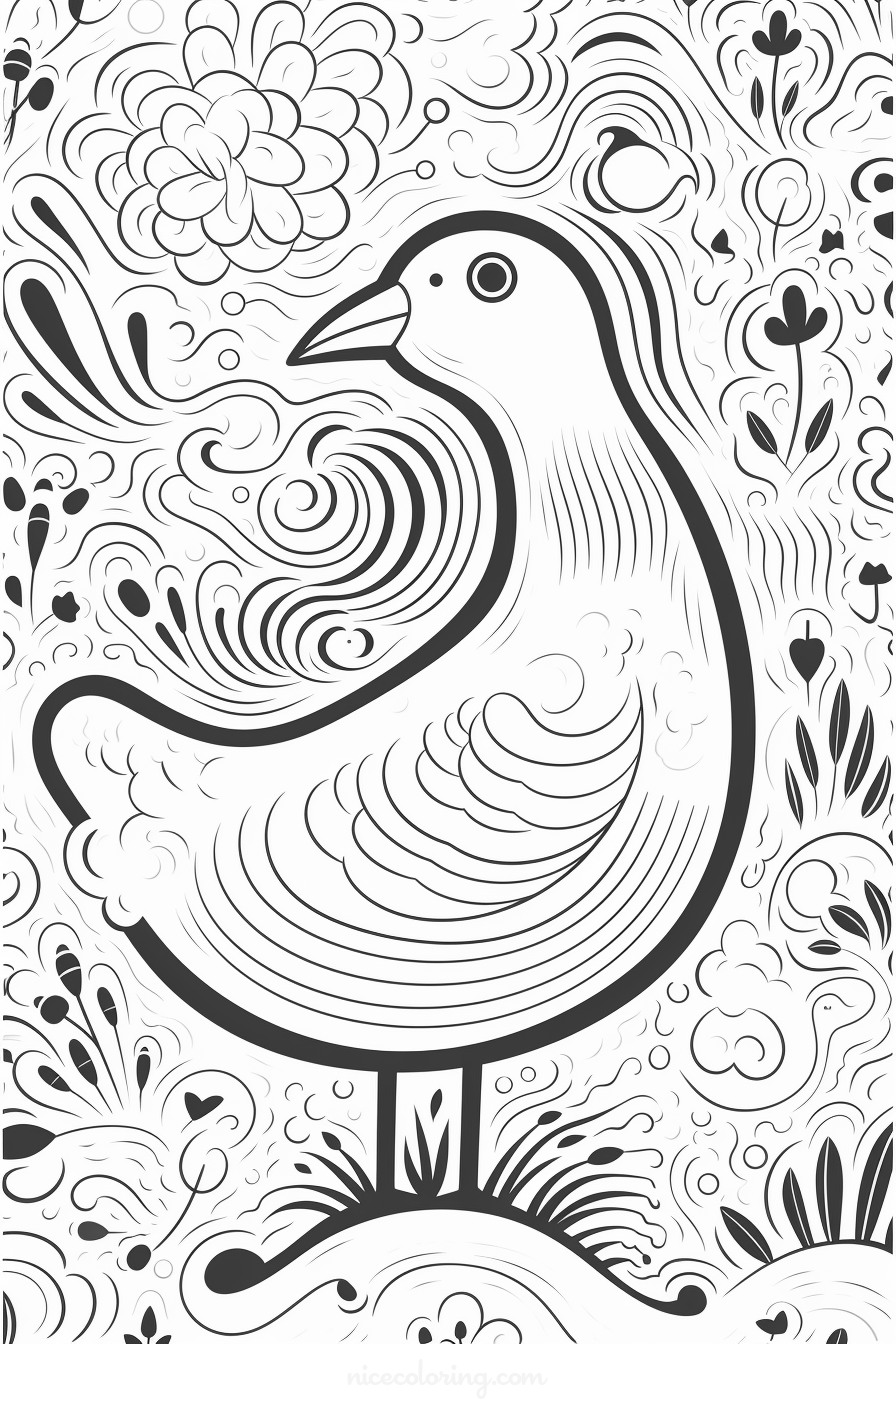 bird in a tropical scene coloring page